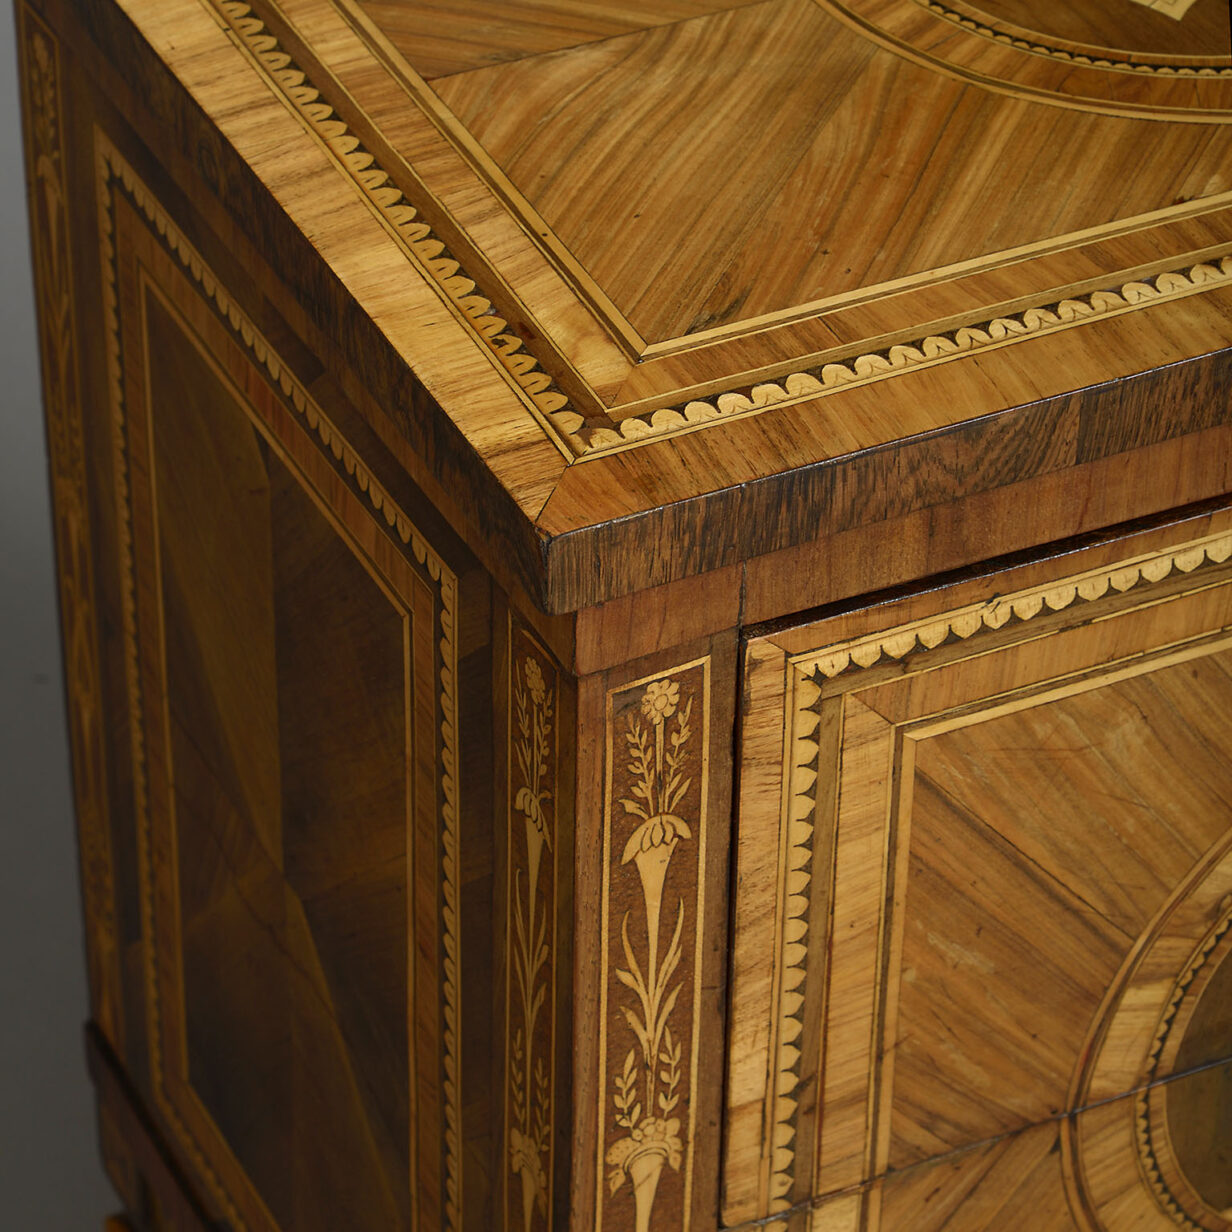 A fine late 18th century marquetry commode of small scale